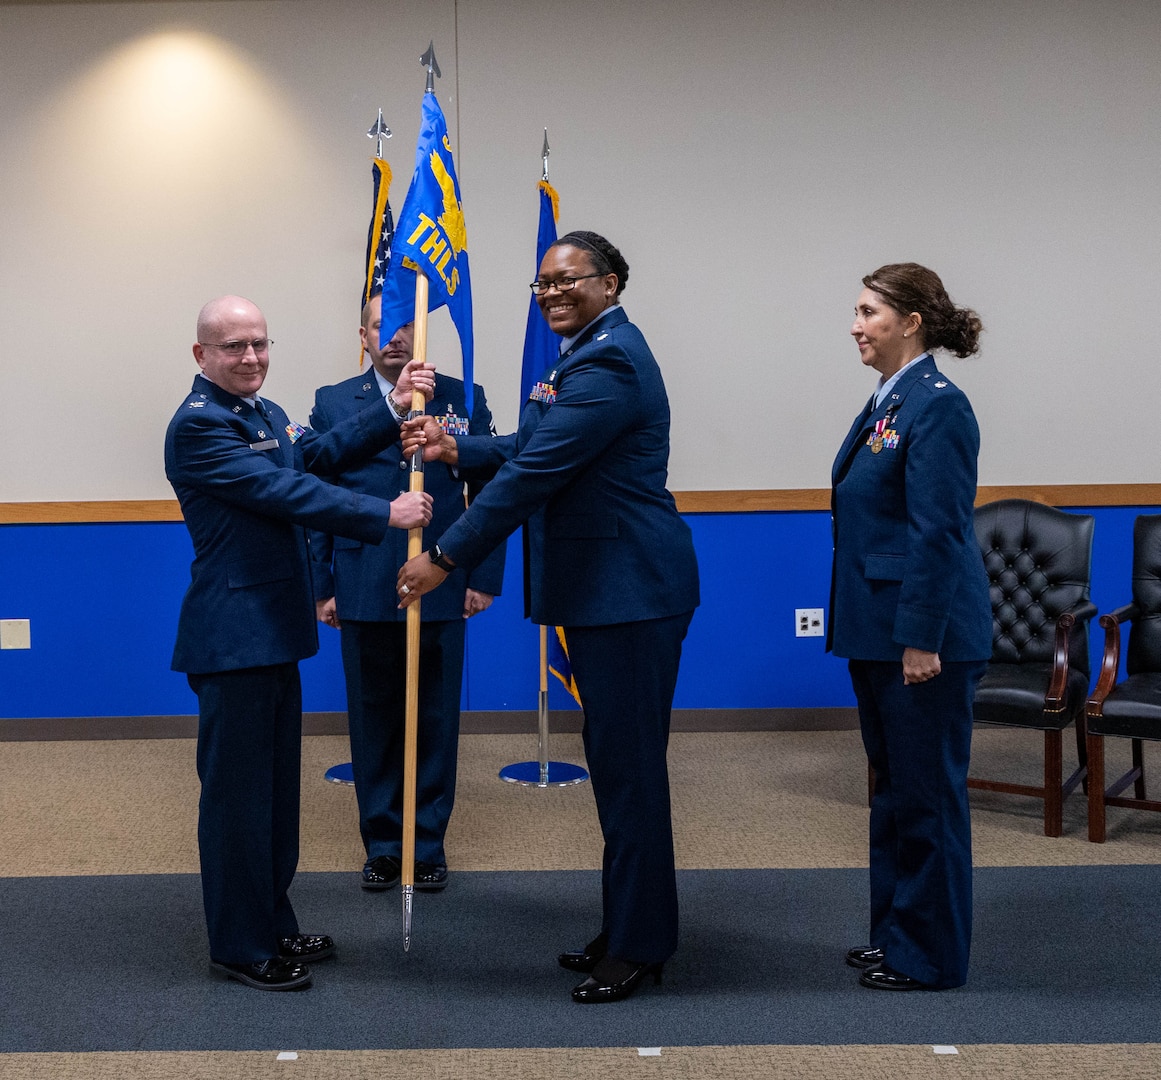 Lt. Col. Lena Williams Cox receives the 559 Trainee Health Squadron guidon flag which signifies their unit designation and branch/corps affiliation or the title of the individual who carries it.